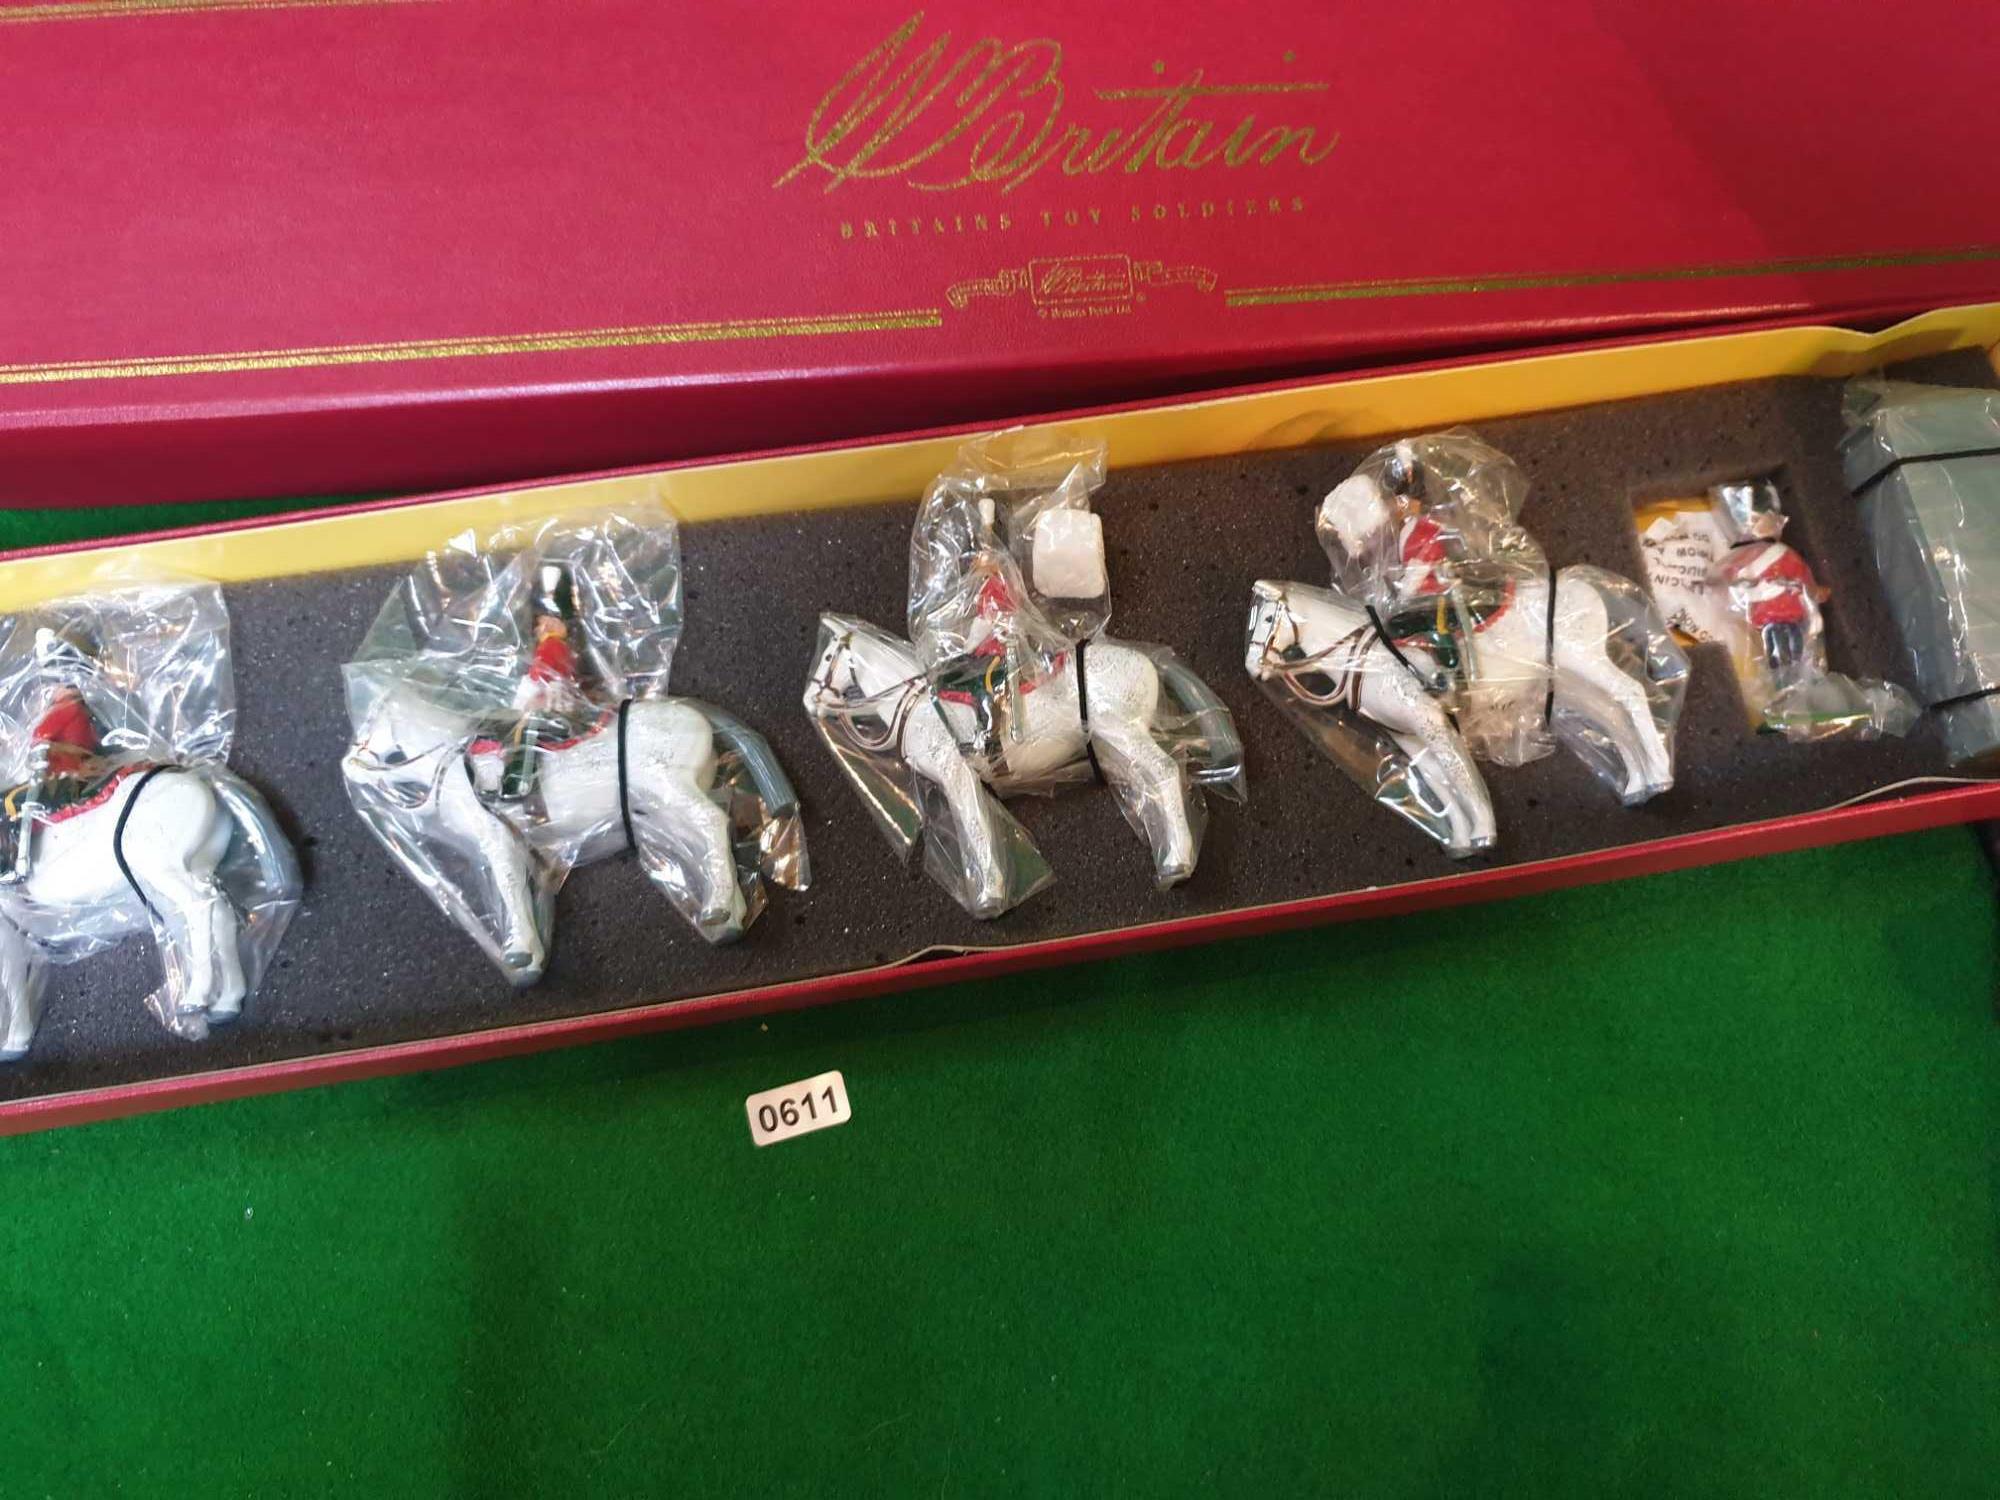 Britains 00075 British Royal Scots Greys Mounted Metal Toy Soldier Figure Set Mint Sealed In Box The - Image 2 of 2